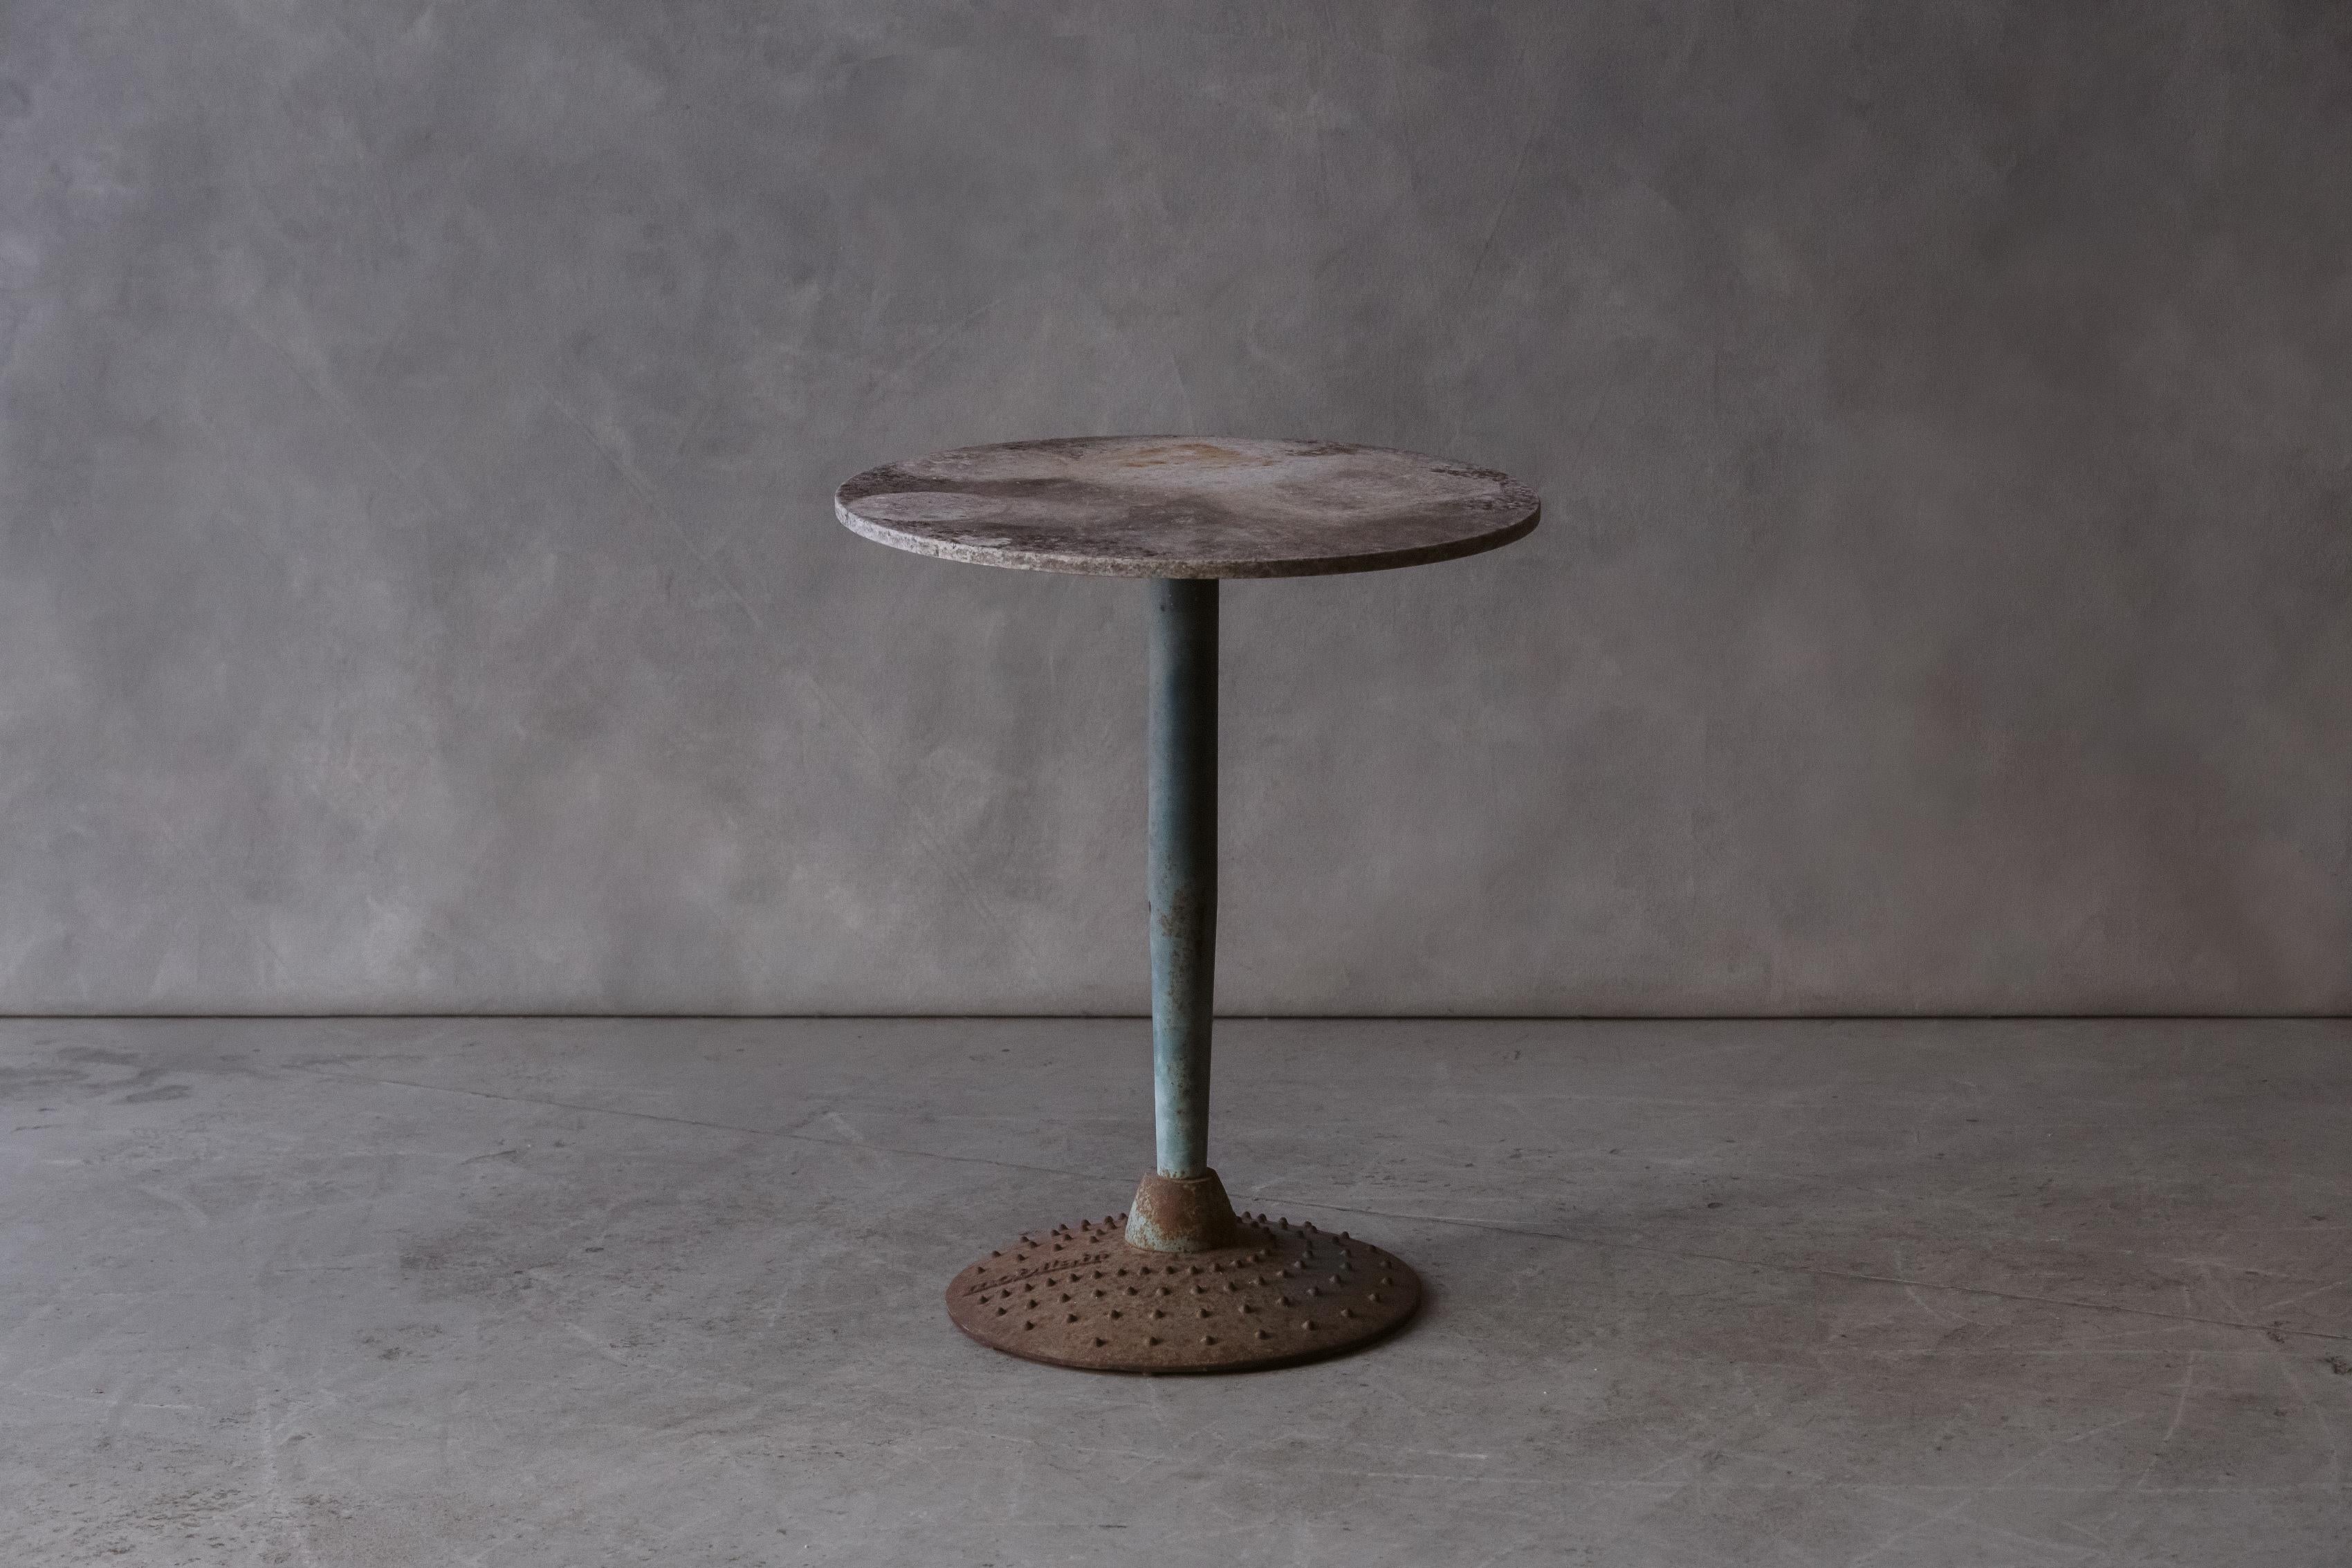 Vintage stone bistro table From France, circa 1960. Light grey stone top on a steel base. Nice original color and patina.

We prefer to speak directly with our clients. So, If you have any questions or would like to know more please give us a call